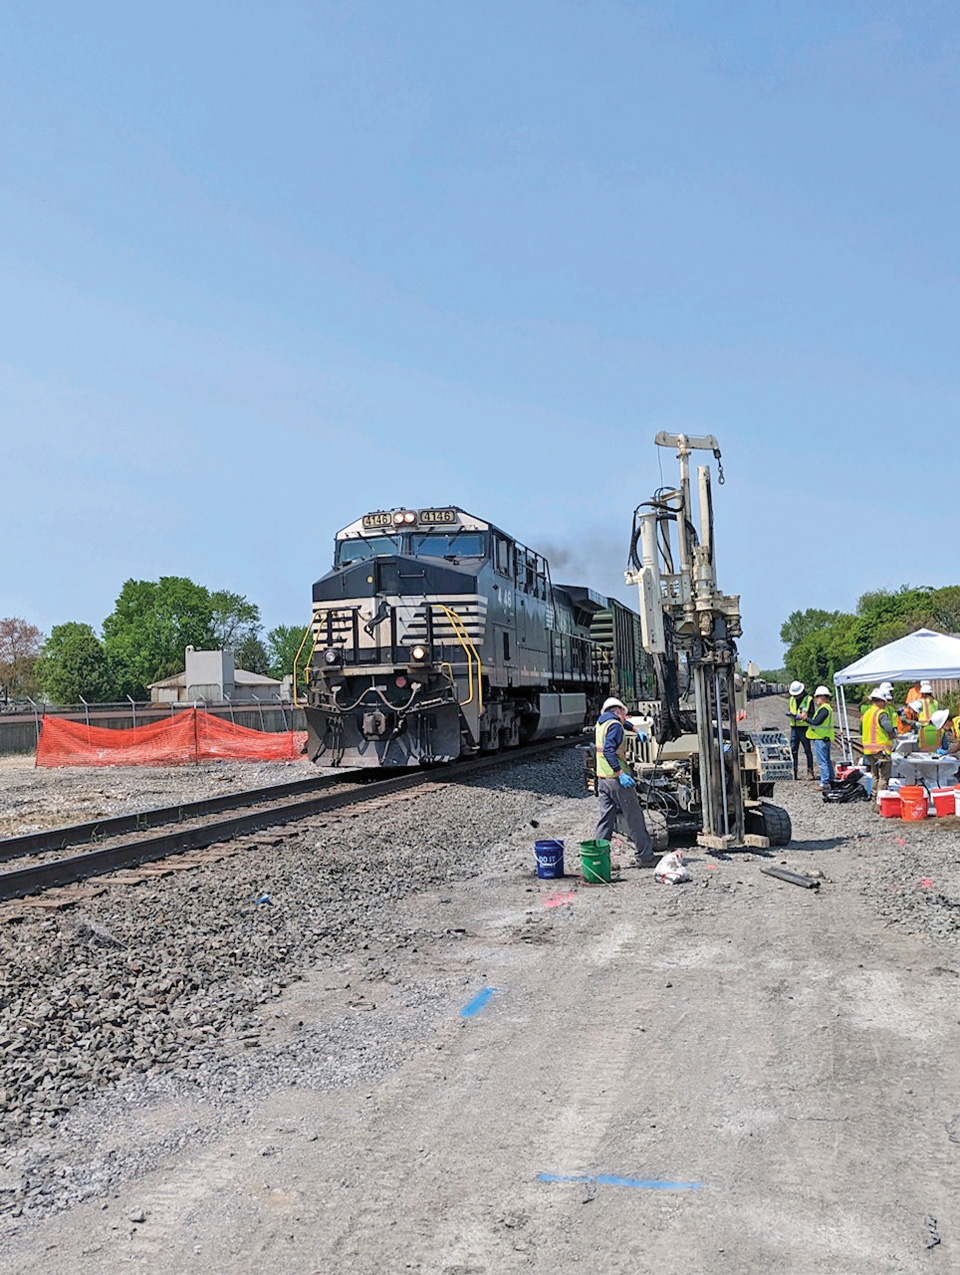 Combination of 7822DT, 6620DT, and 6610DT provides perfect fleet to do site investigation on East Palestine Derailment site involving hazardous material contamination and remediation.